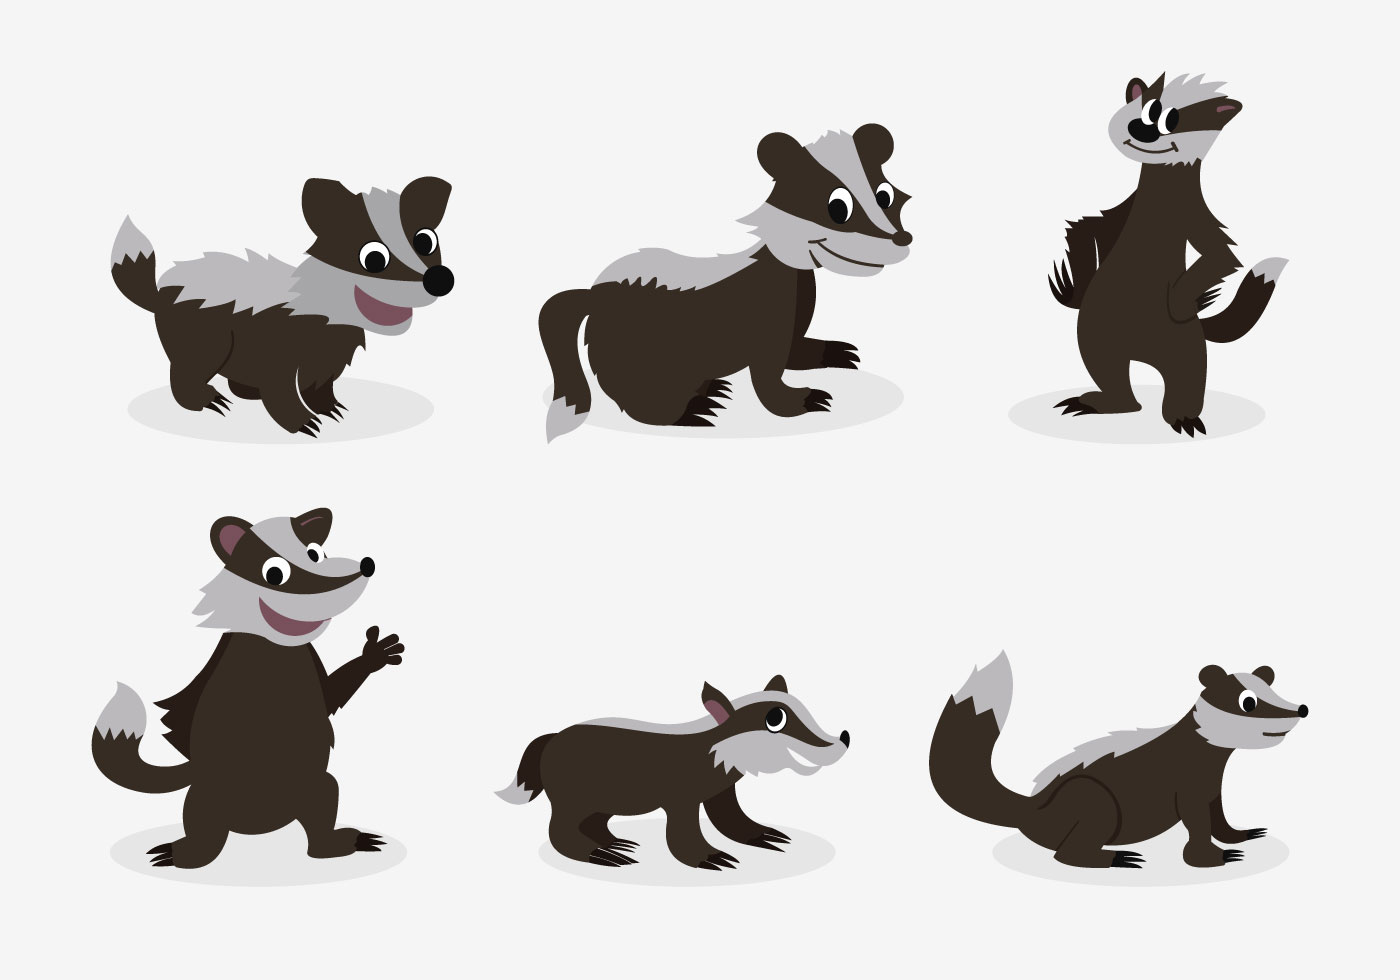 Browse 193 incredible Badger Cartoon vectors, icons, clipart graphics, and ...